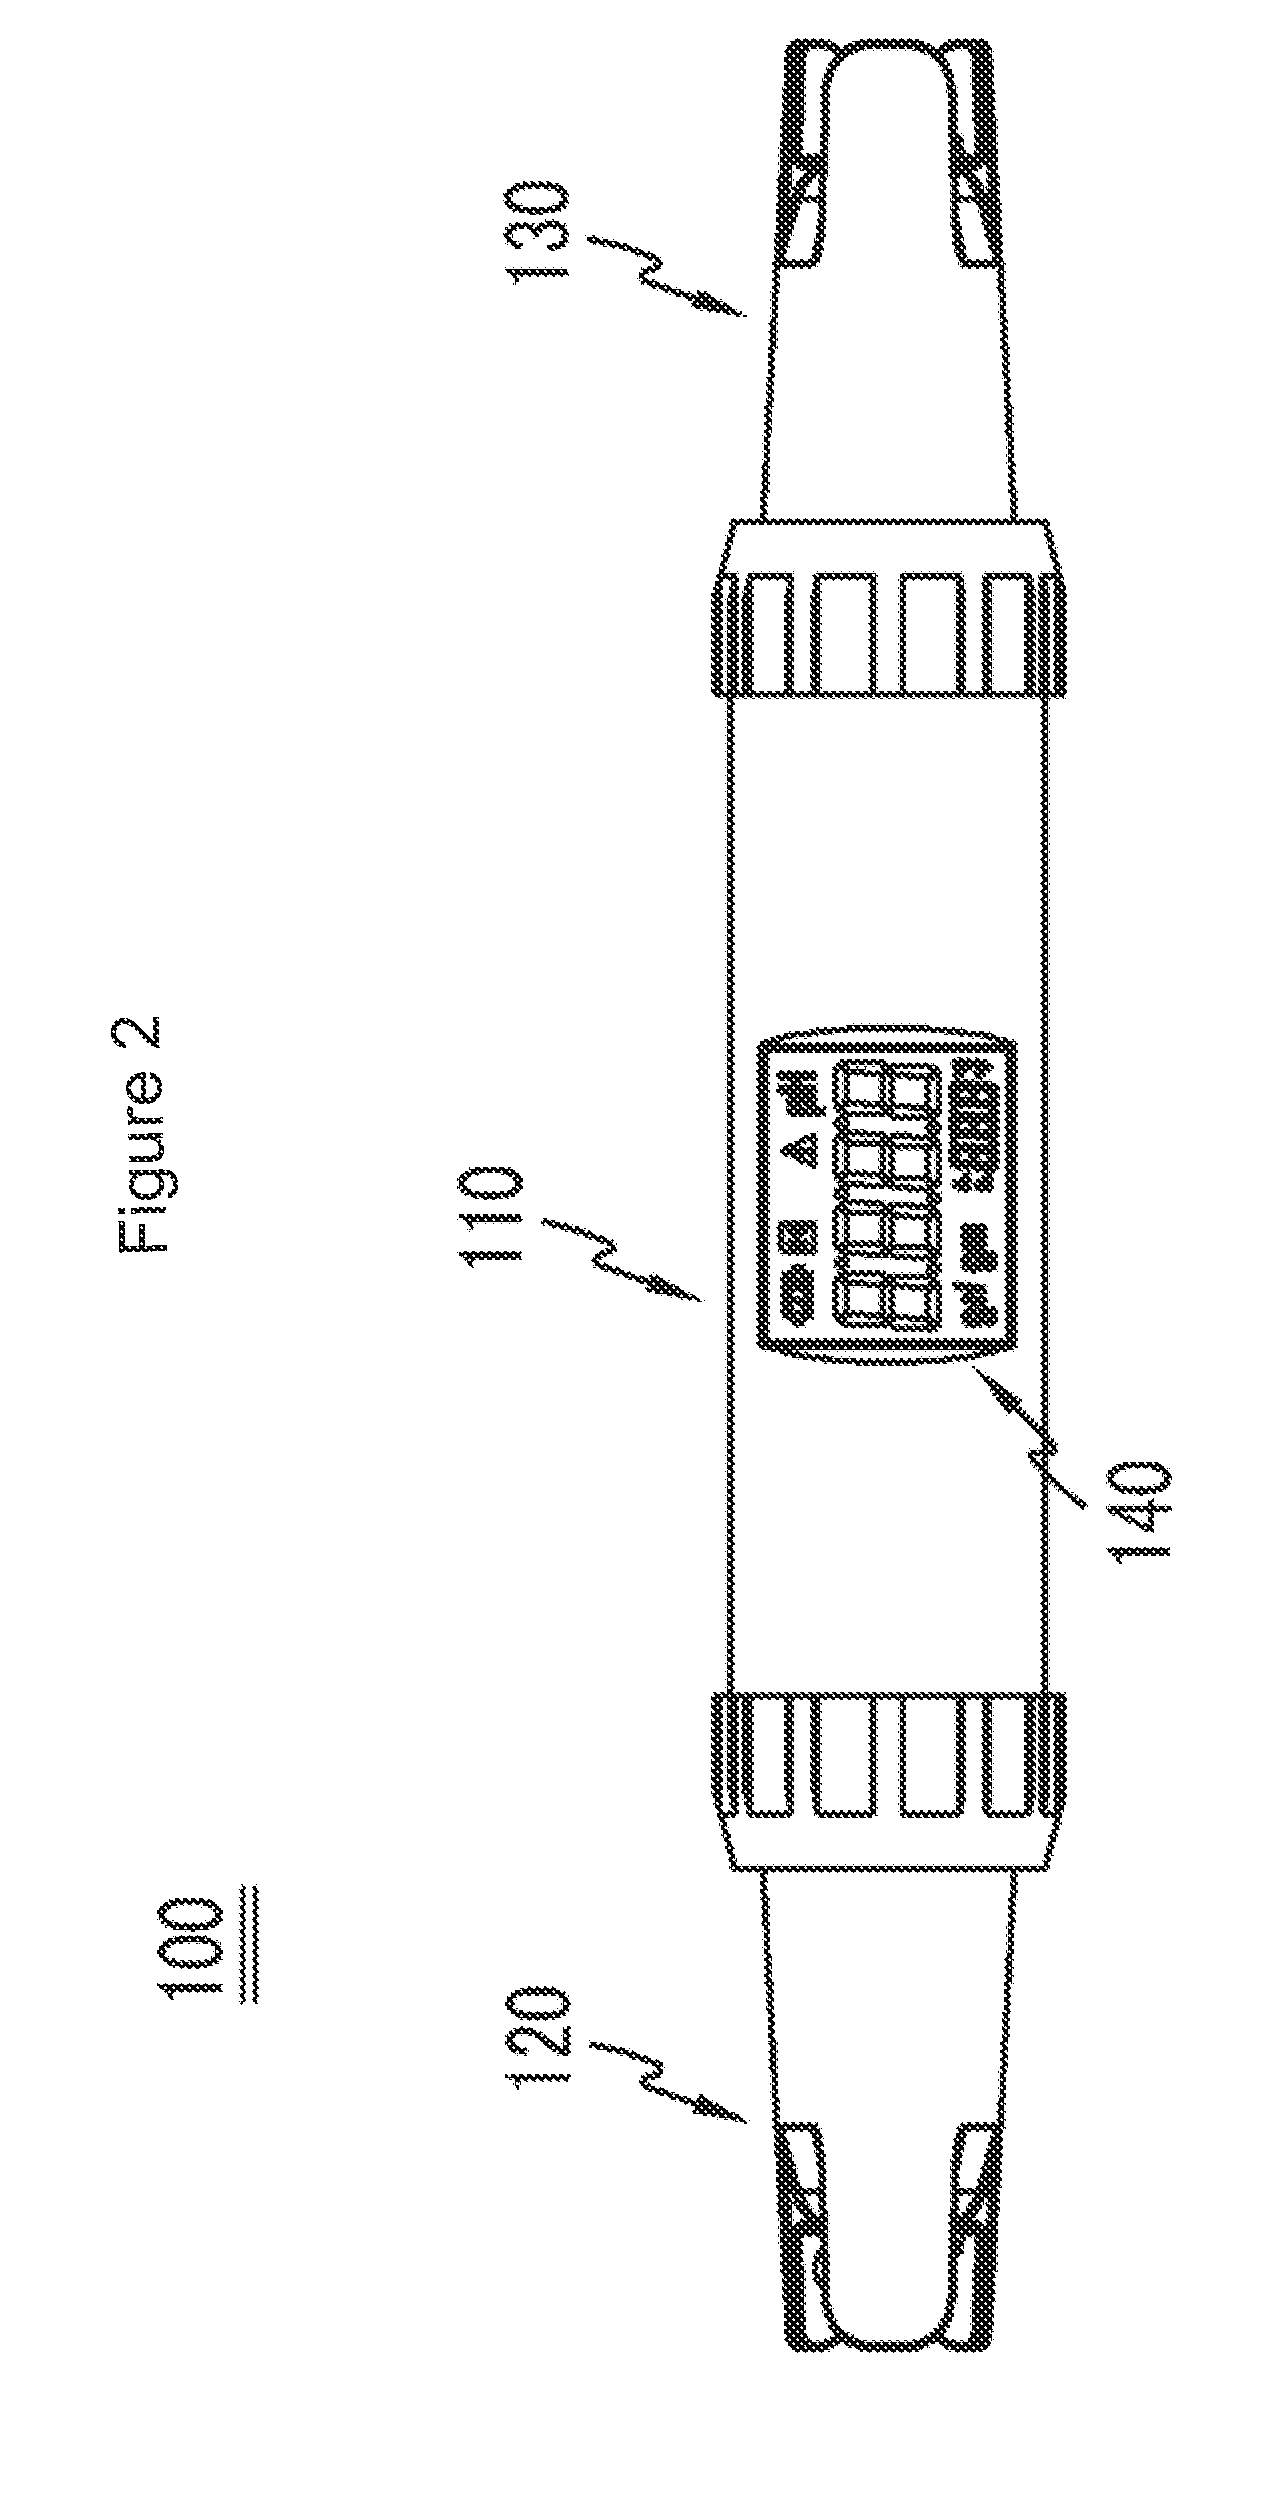 Pen type of apparatus for measuring multiple water qualities